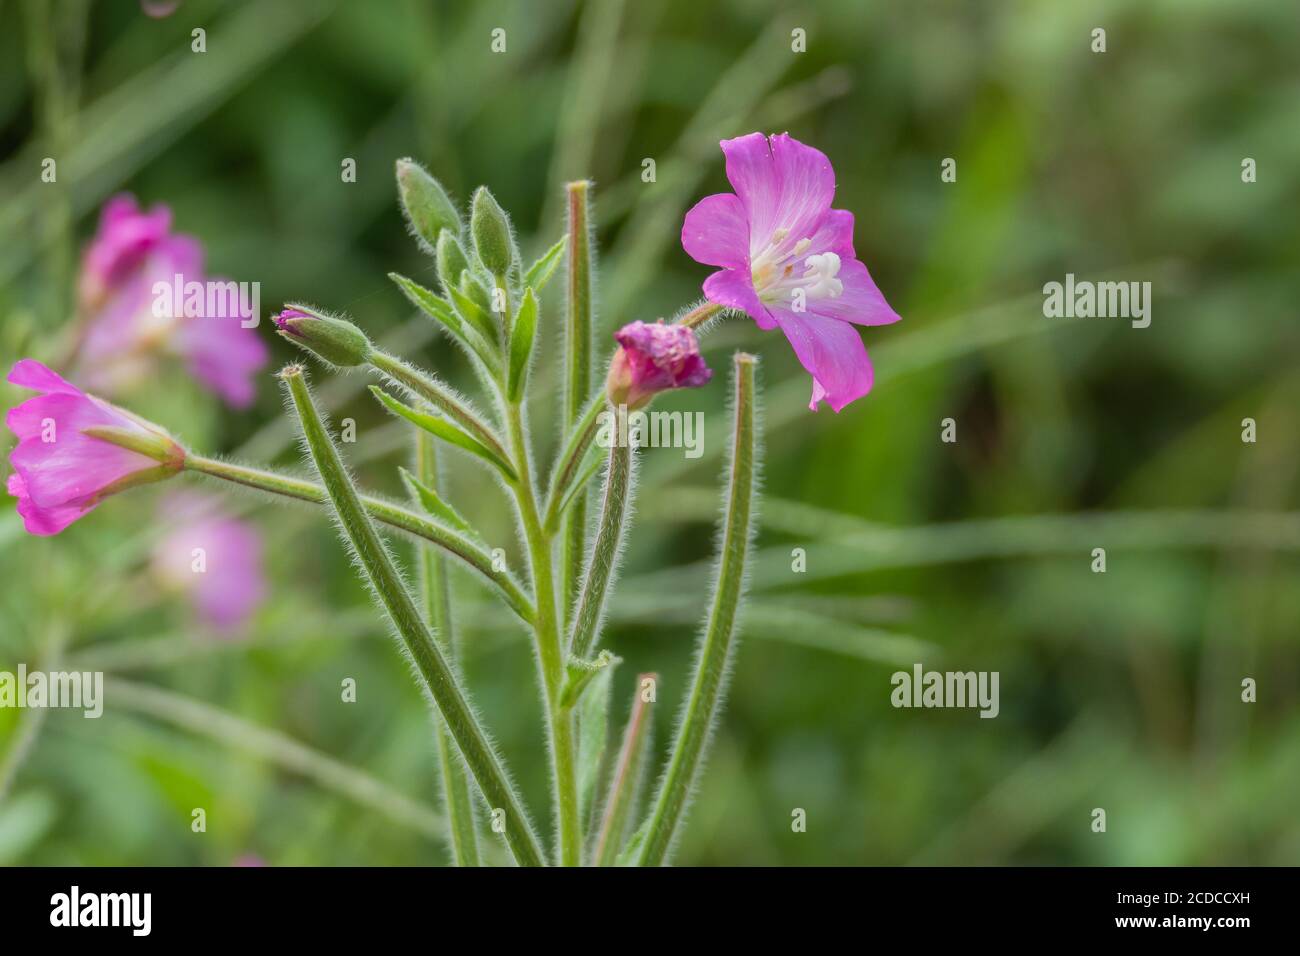 flowers from hairy willowherb plant in summer outdoors Stock Photo